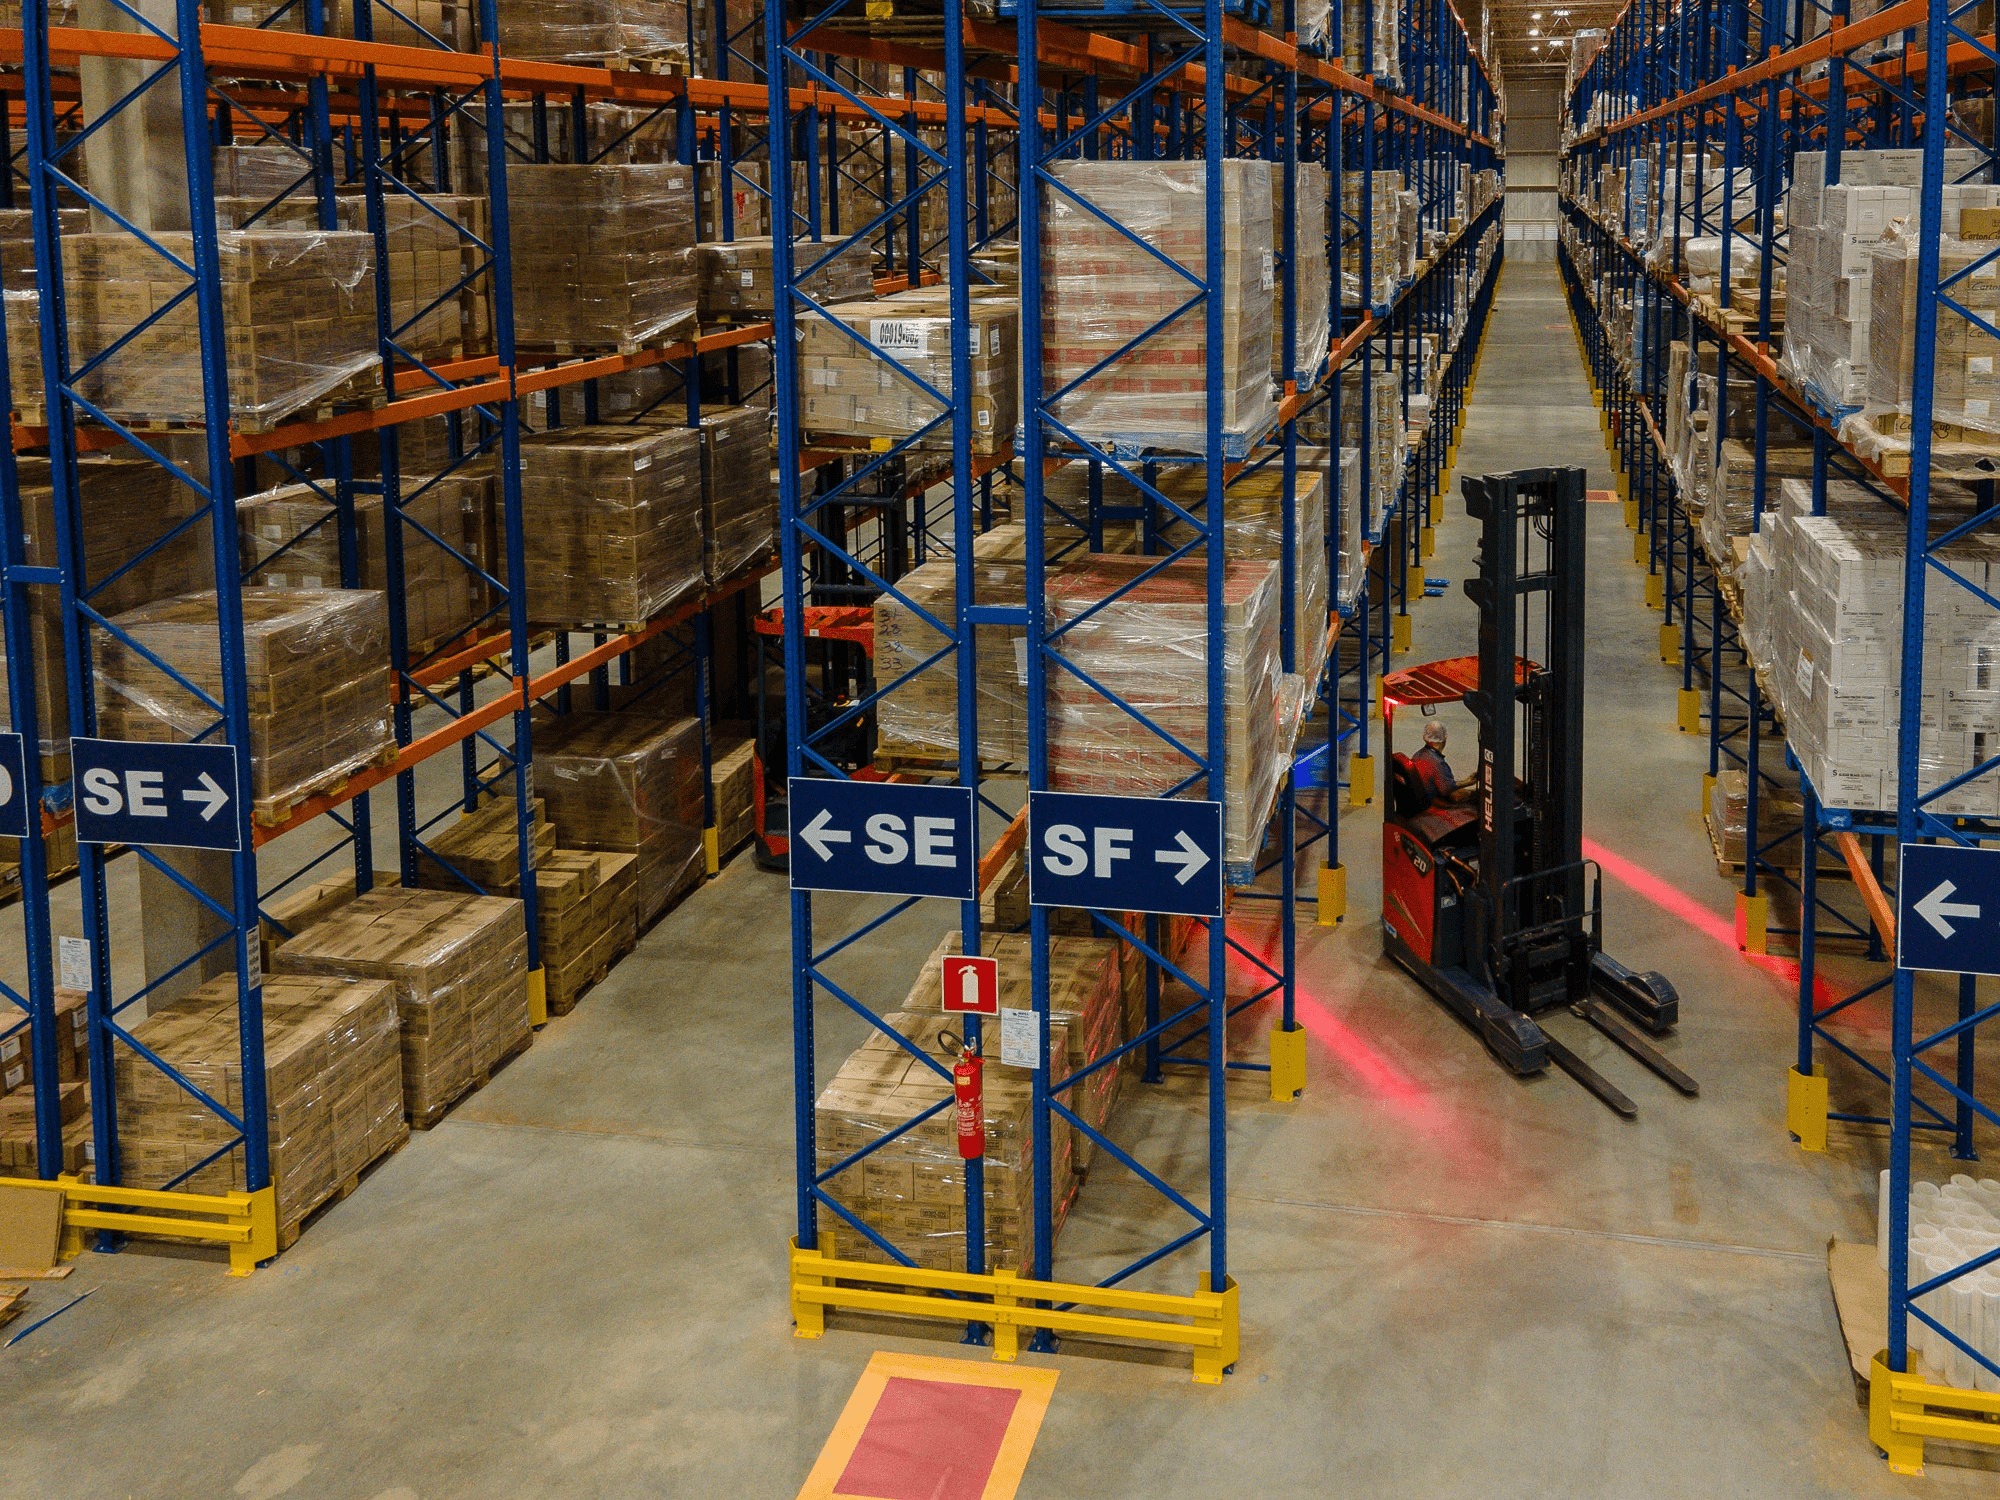 View from the second floor of the warehouse on a forklift moving among racks with pallets